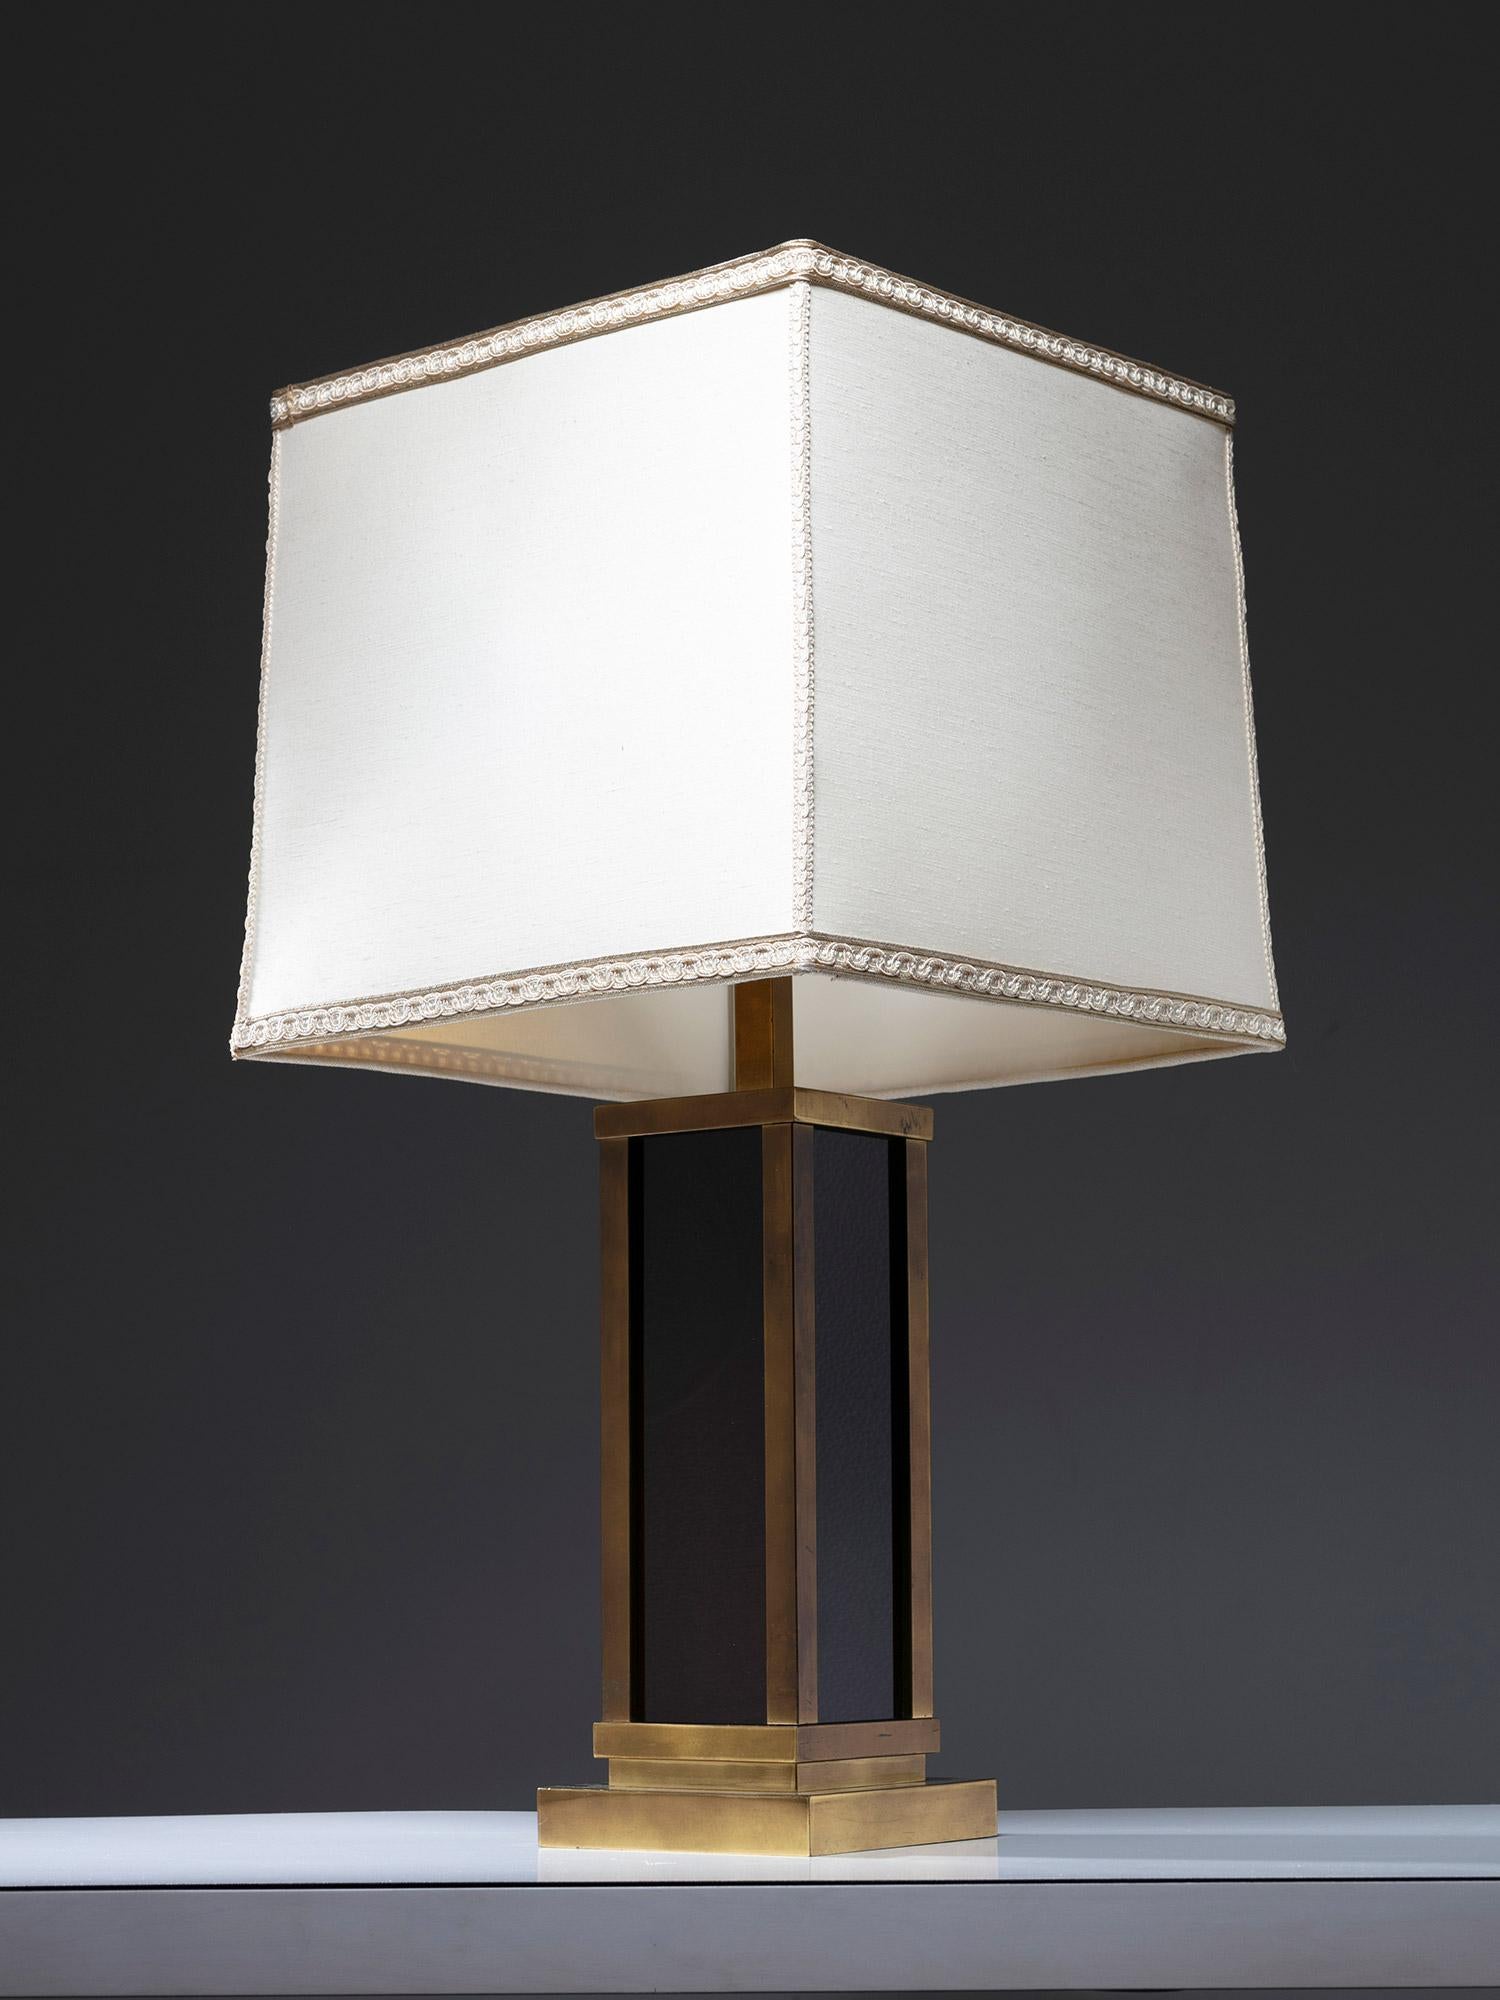 Monumental Romeo Rega Style Minimal Brass Table Lamp, Italy, 1970s In Good Condition For Sale In Milan, IT